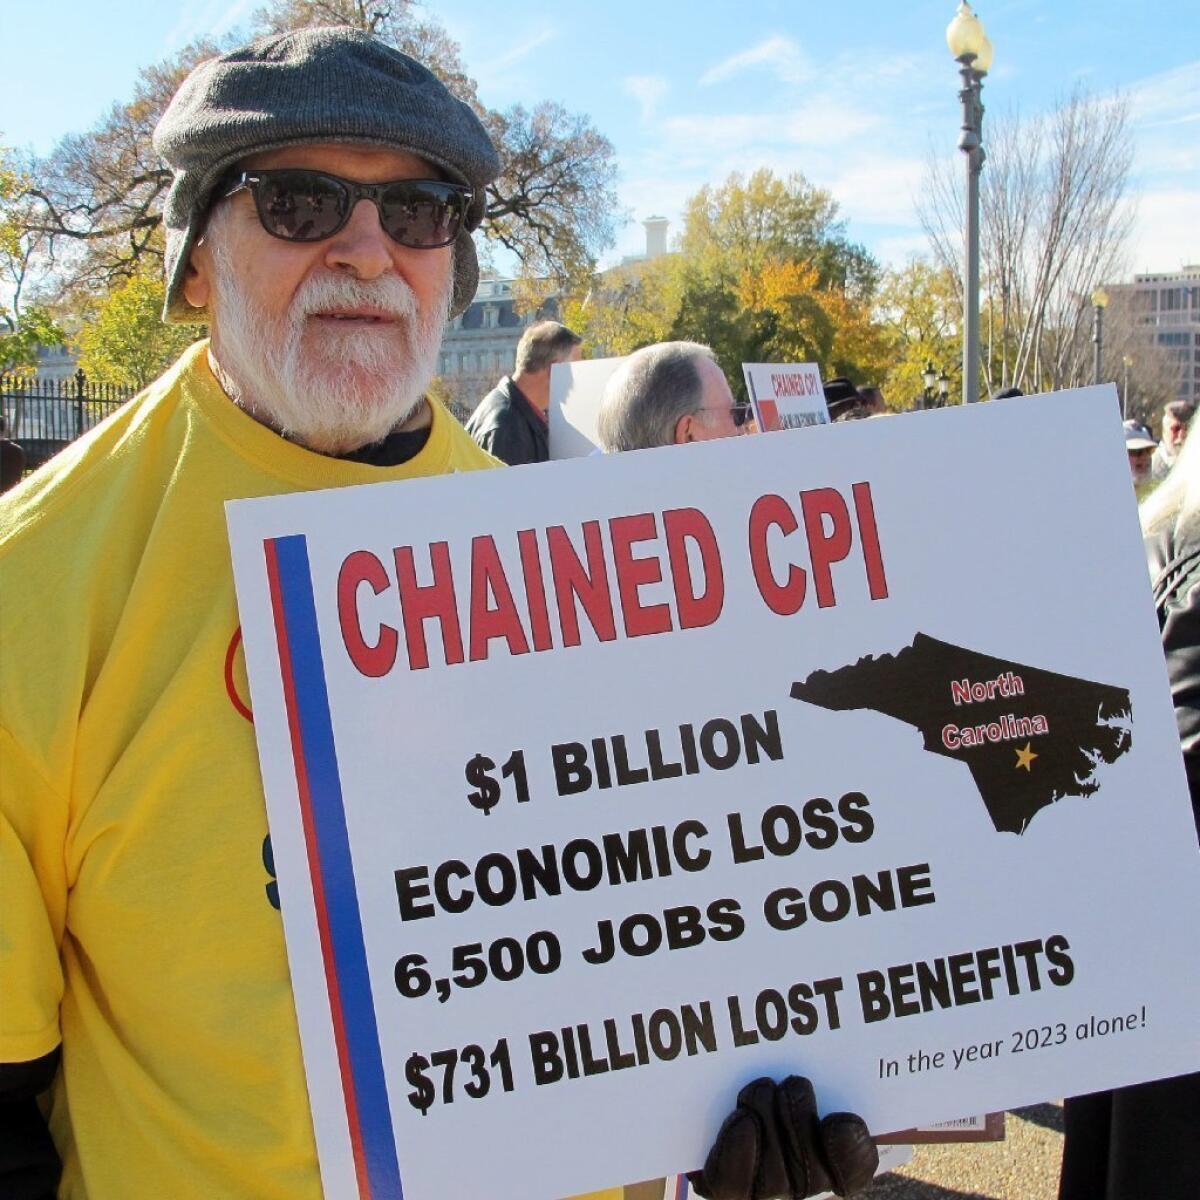 A D.C. protester speaks out against cutting Social Security benefits.